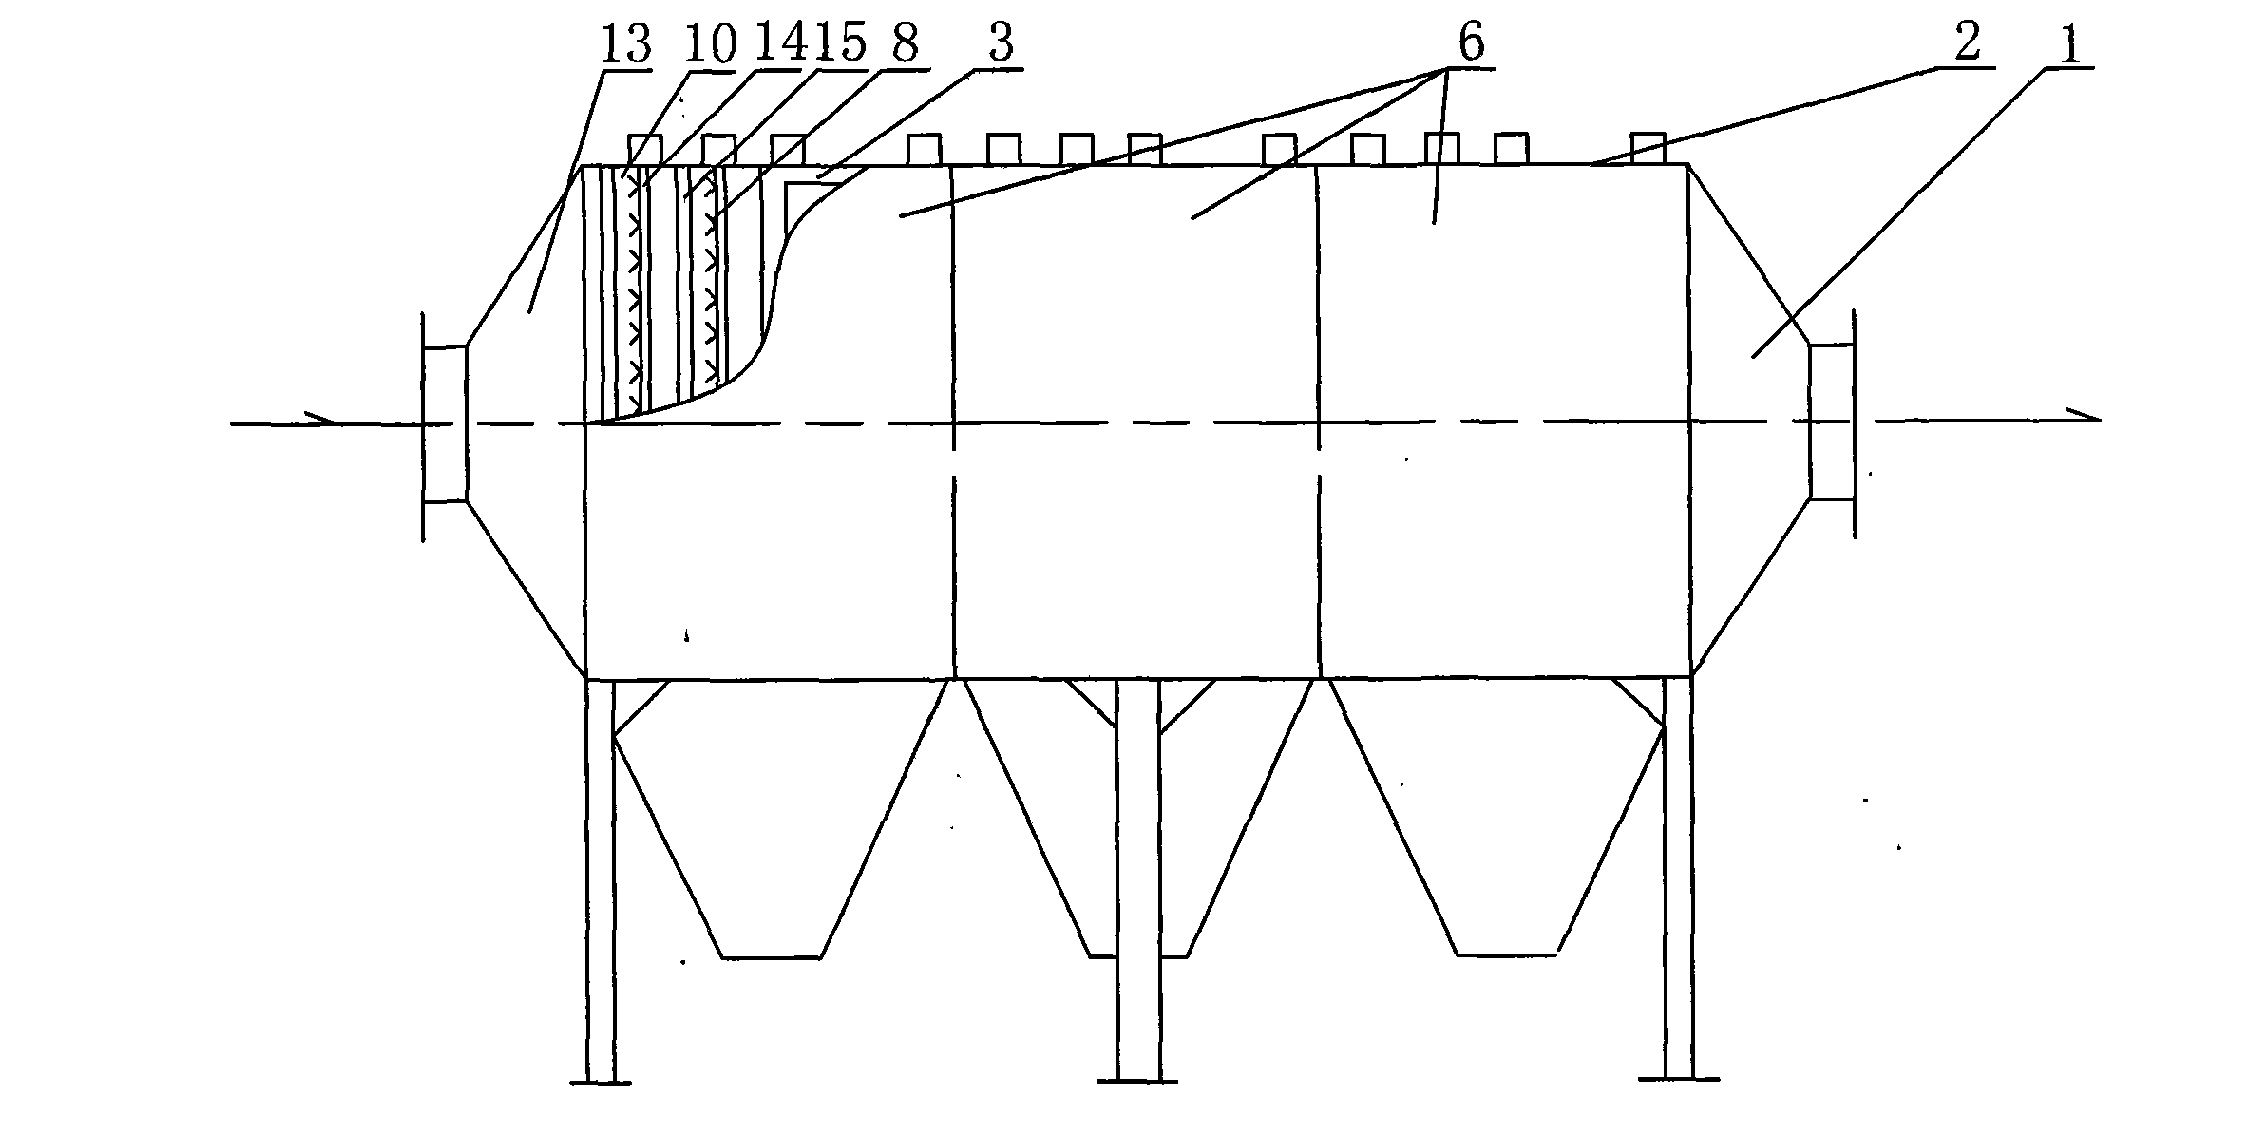 Double-area multi-stage electrostatic precipitator of reverse airflow dust charge